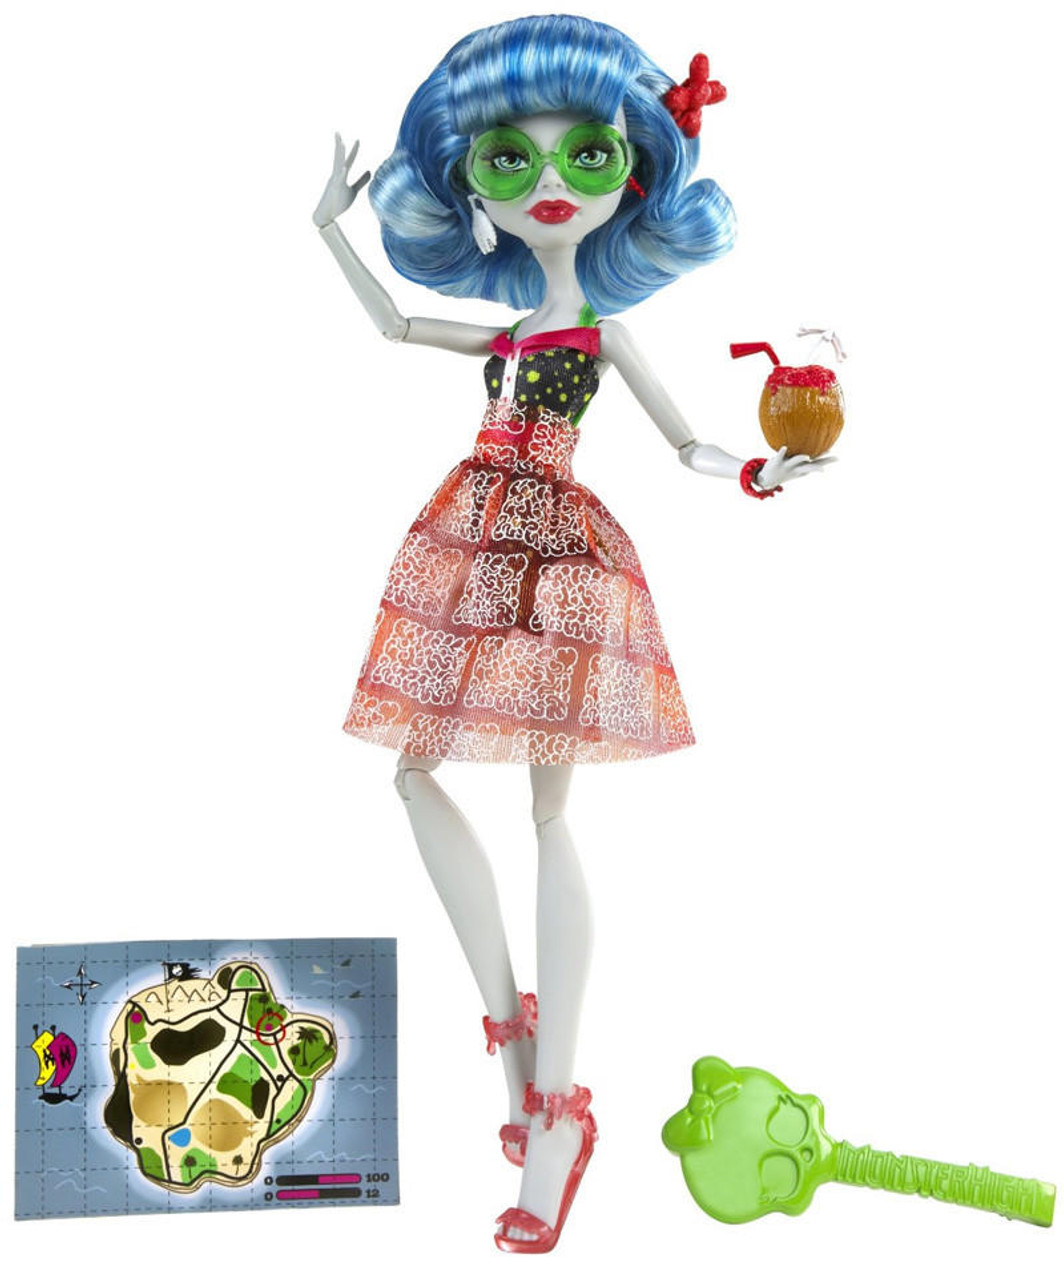 Monster High Ghoulia Yelps Doll & Scooter Set 2011 Mattel X4497 - We-R-Toys